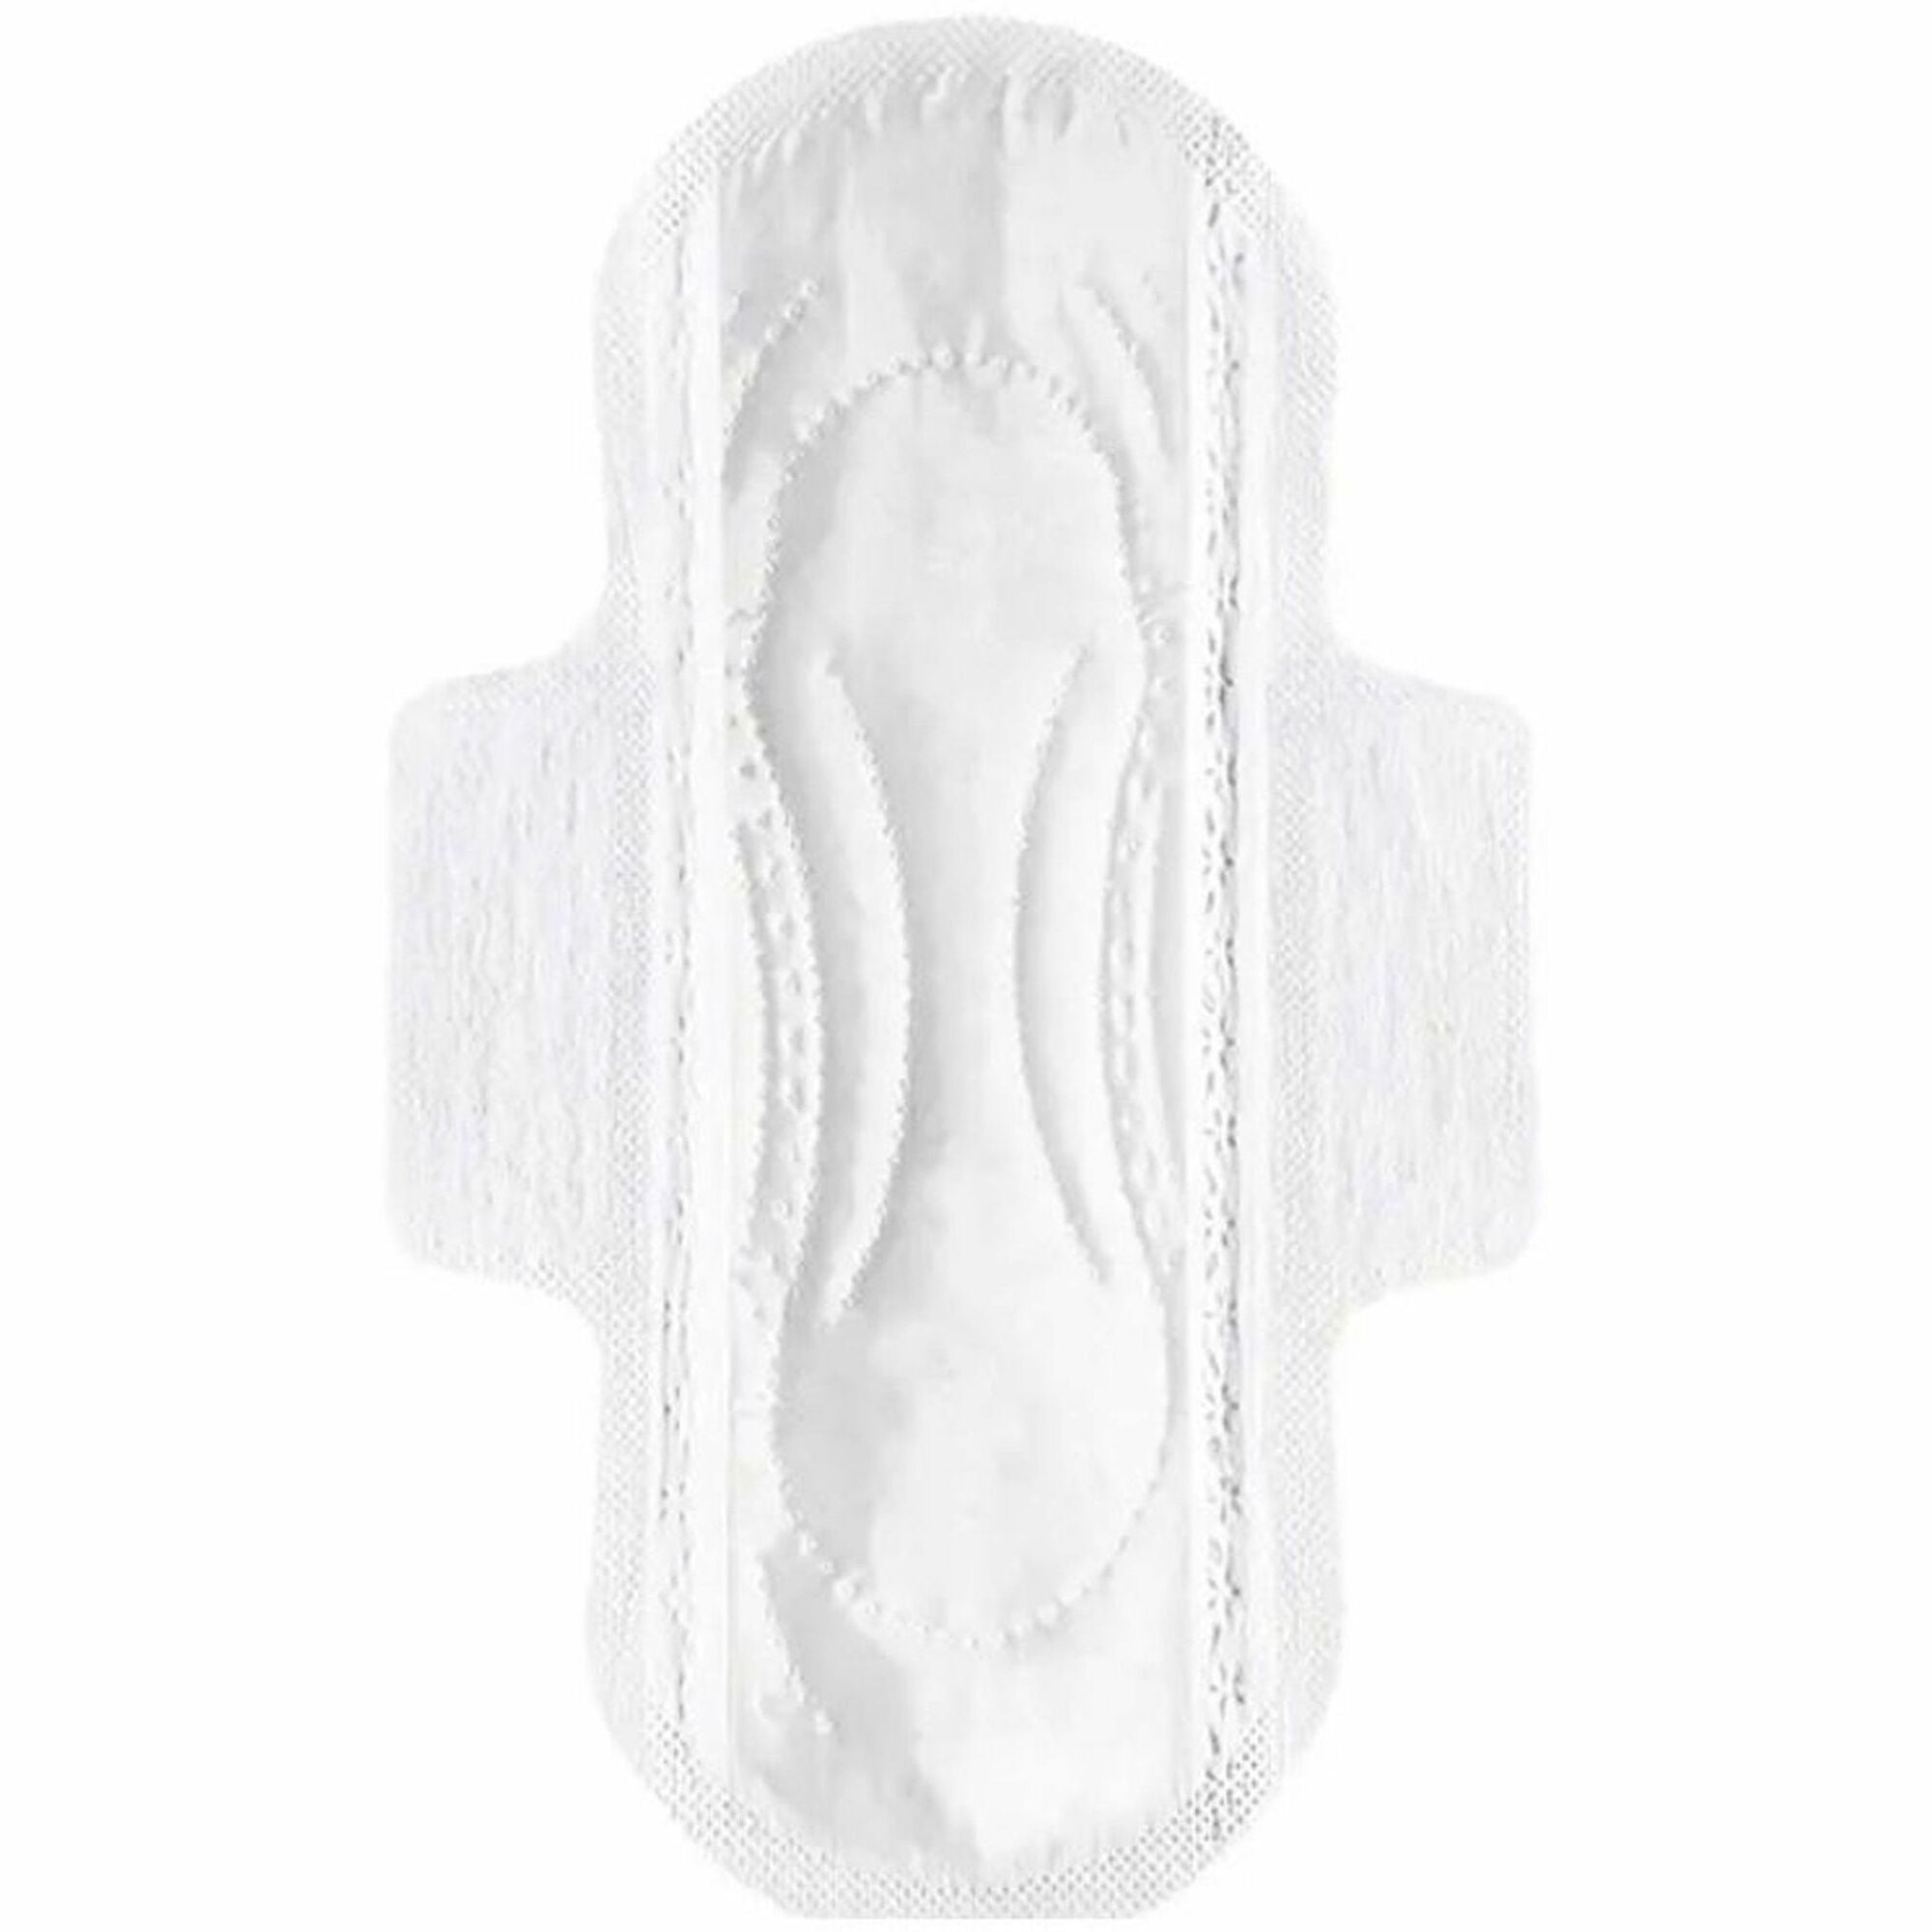 tampon-tribe-organic-pads-500-carton-hypoallergenic-comfortable-anti-leak-absorbent-chlorine-free-individually-wrapped_ttbpads500d - 1